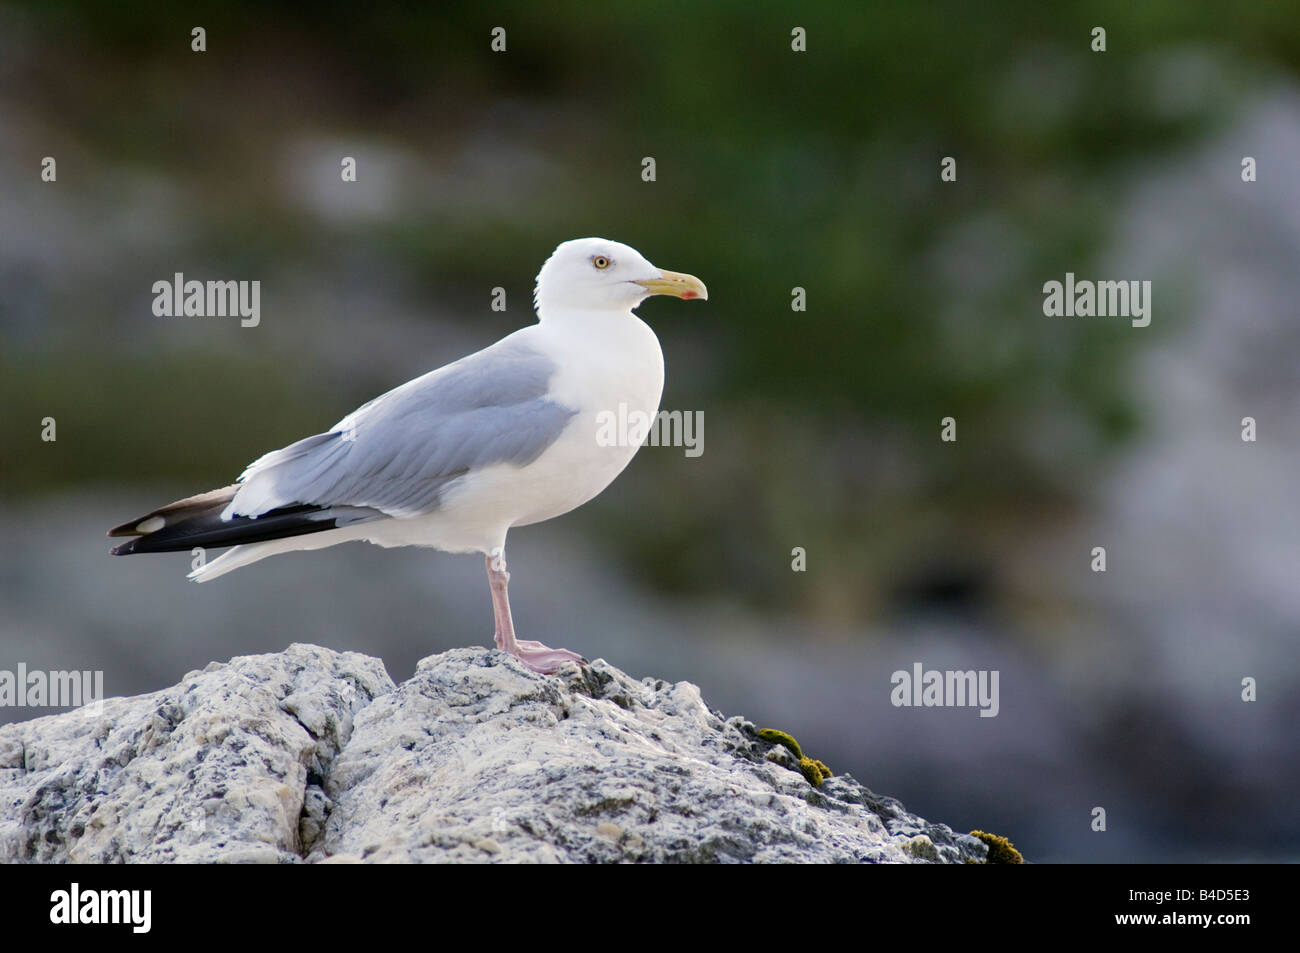 Gull on rock See through Island Blind Pig Channel Voyageurs National Park Minnesota USA Stock Photo